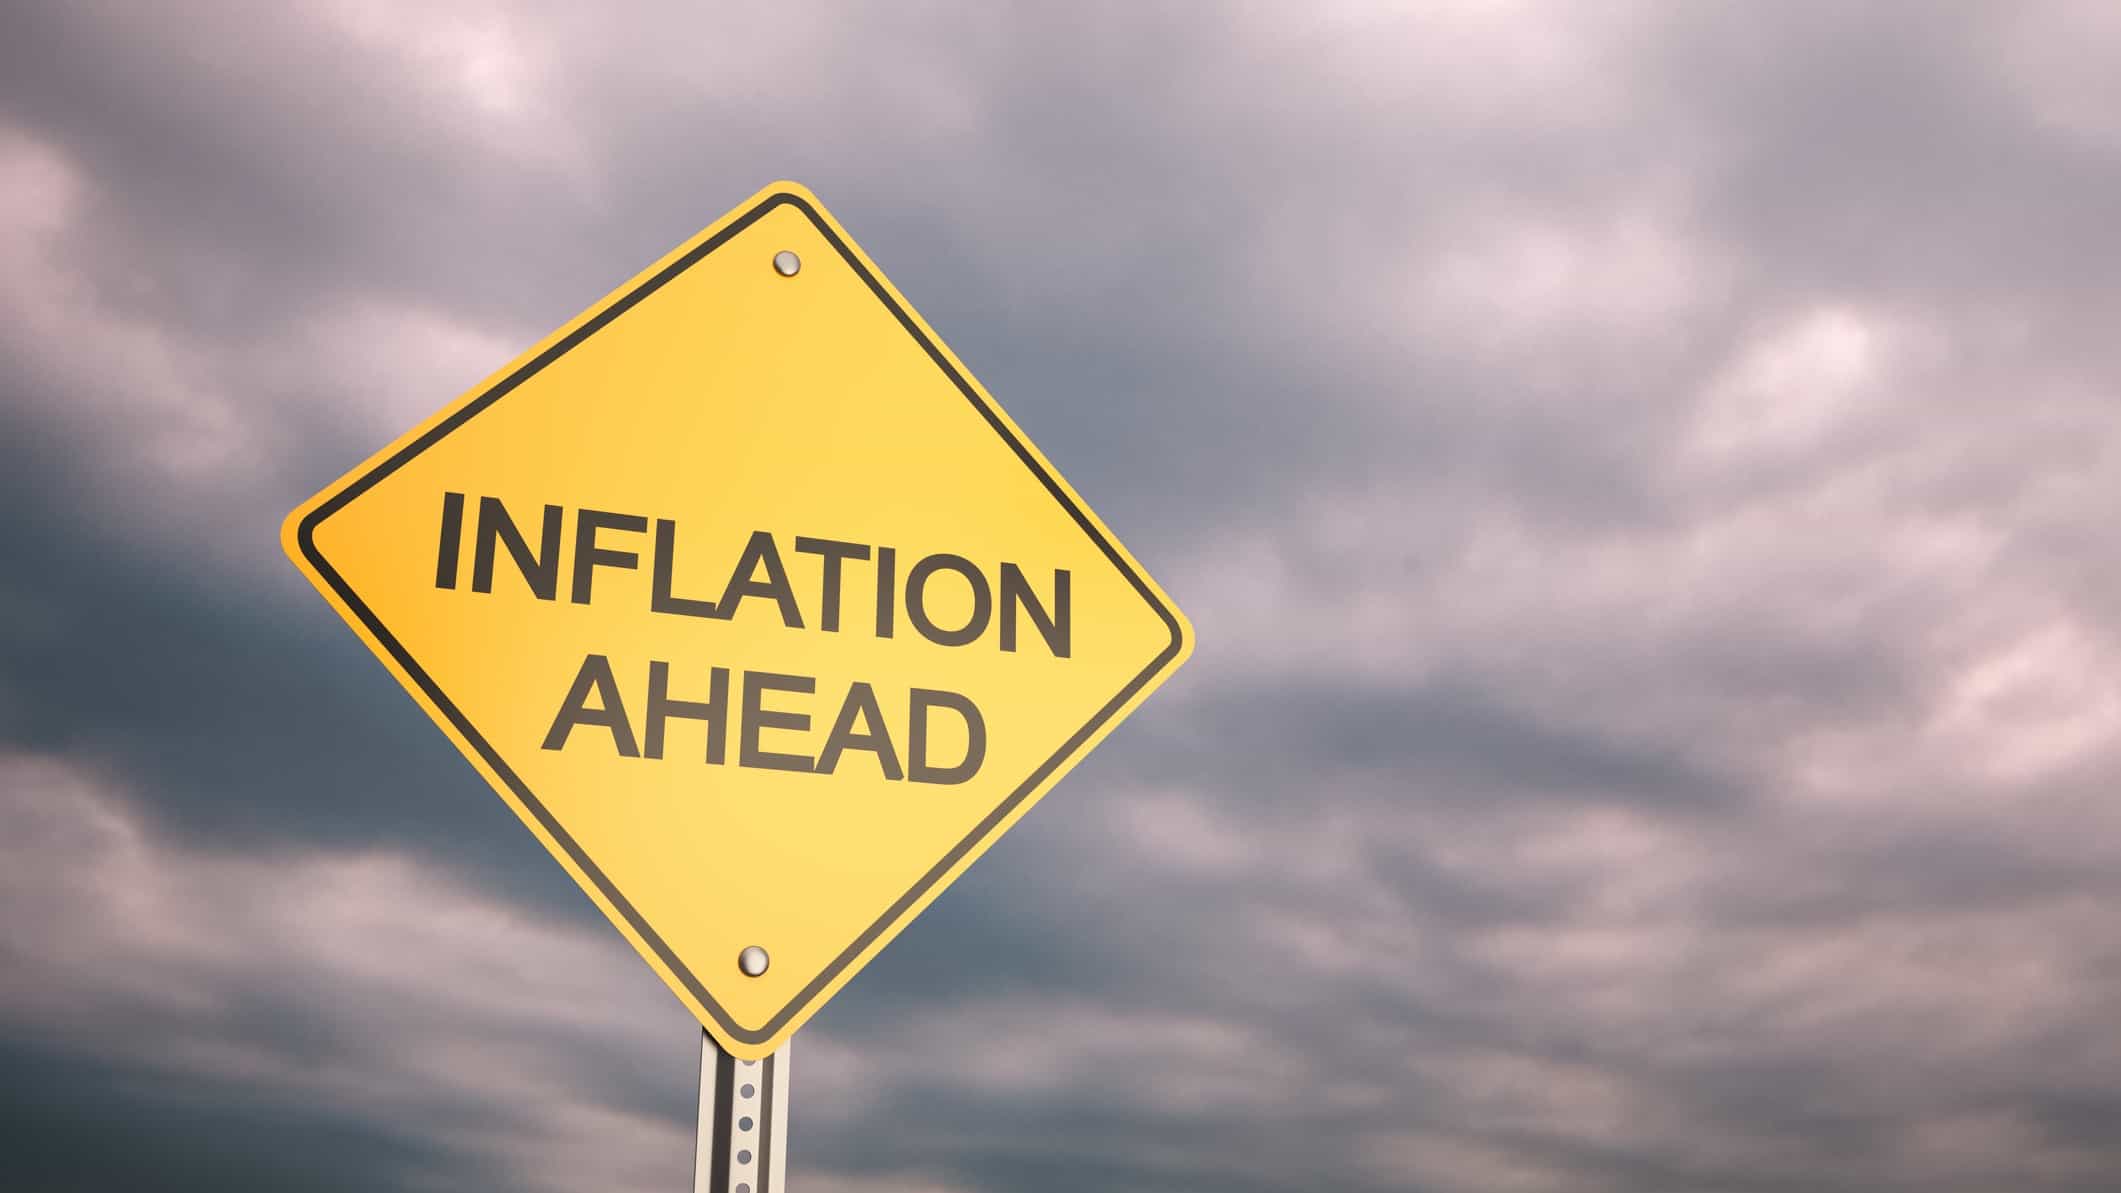 Inflation ahead written on a yellow sign.